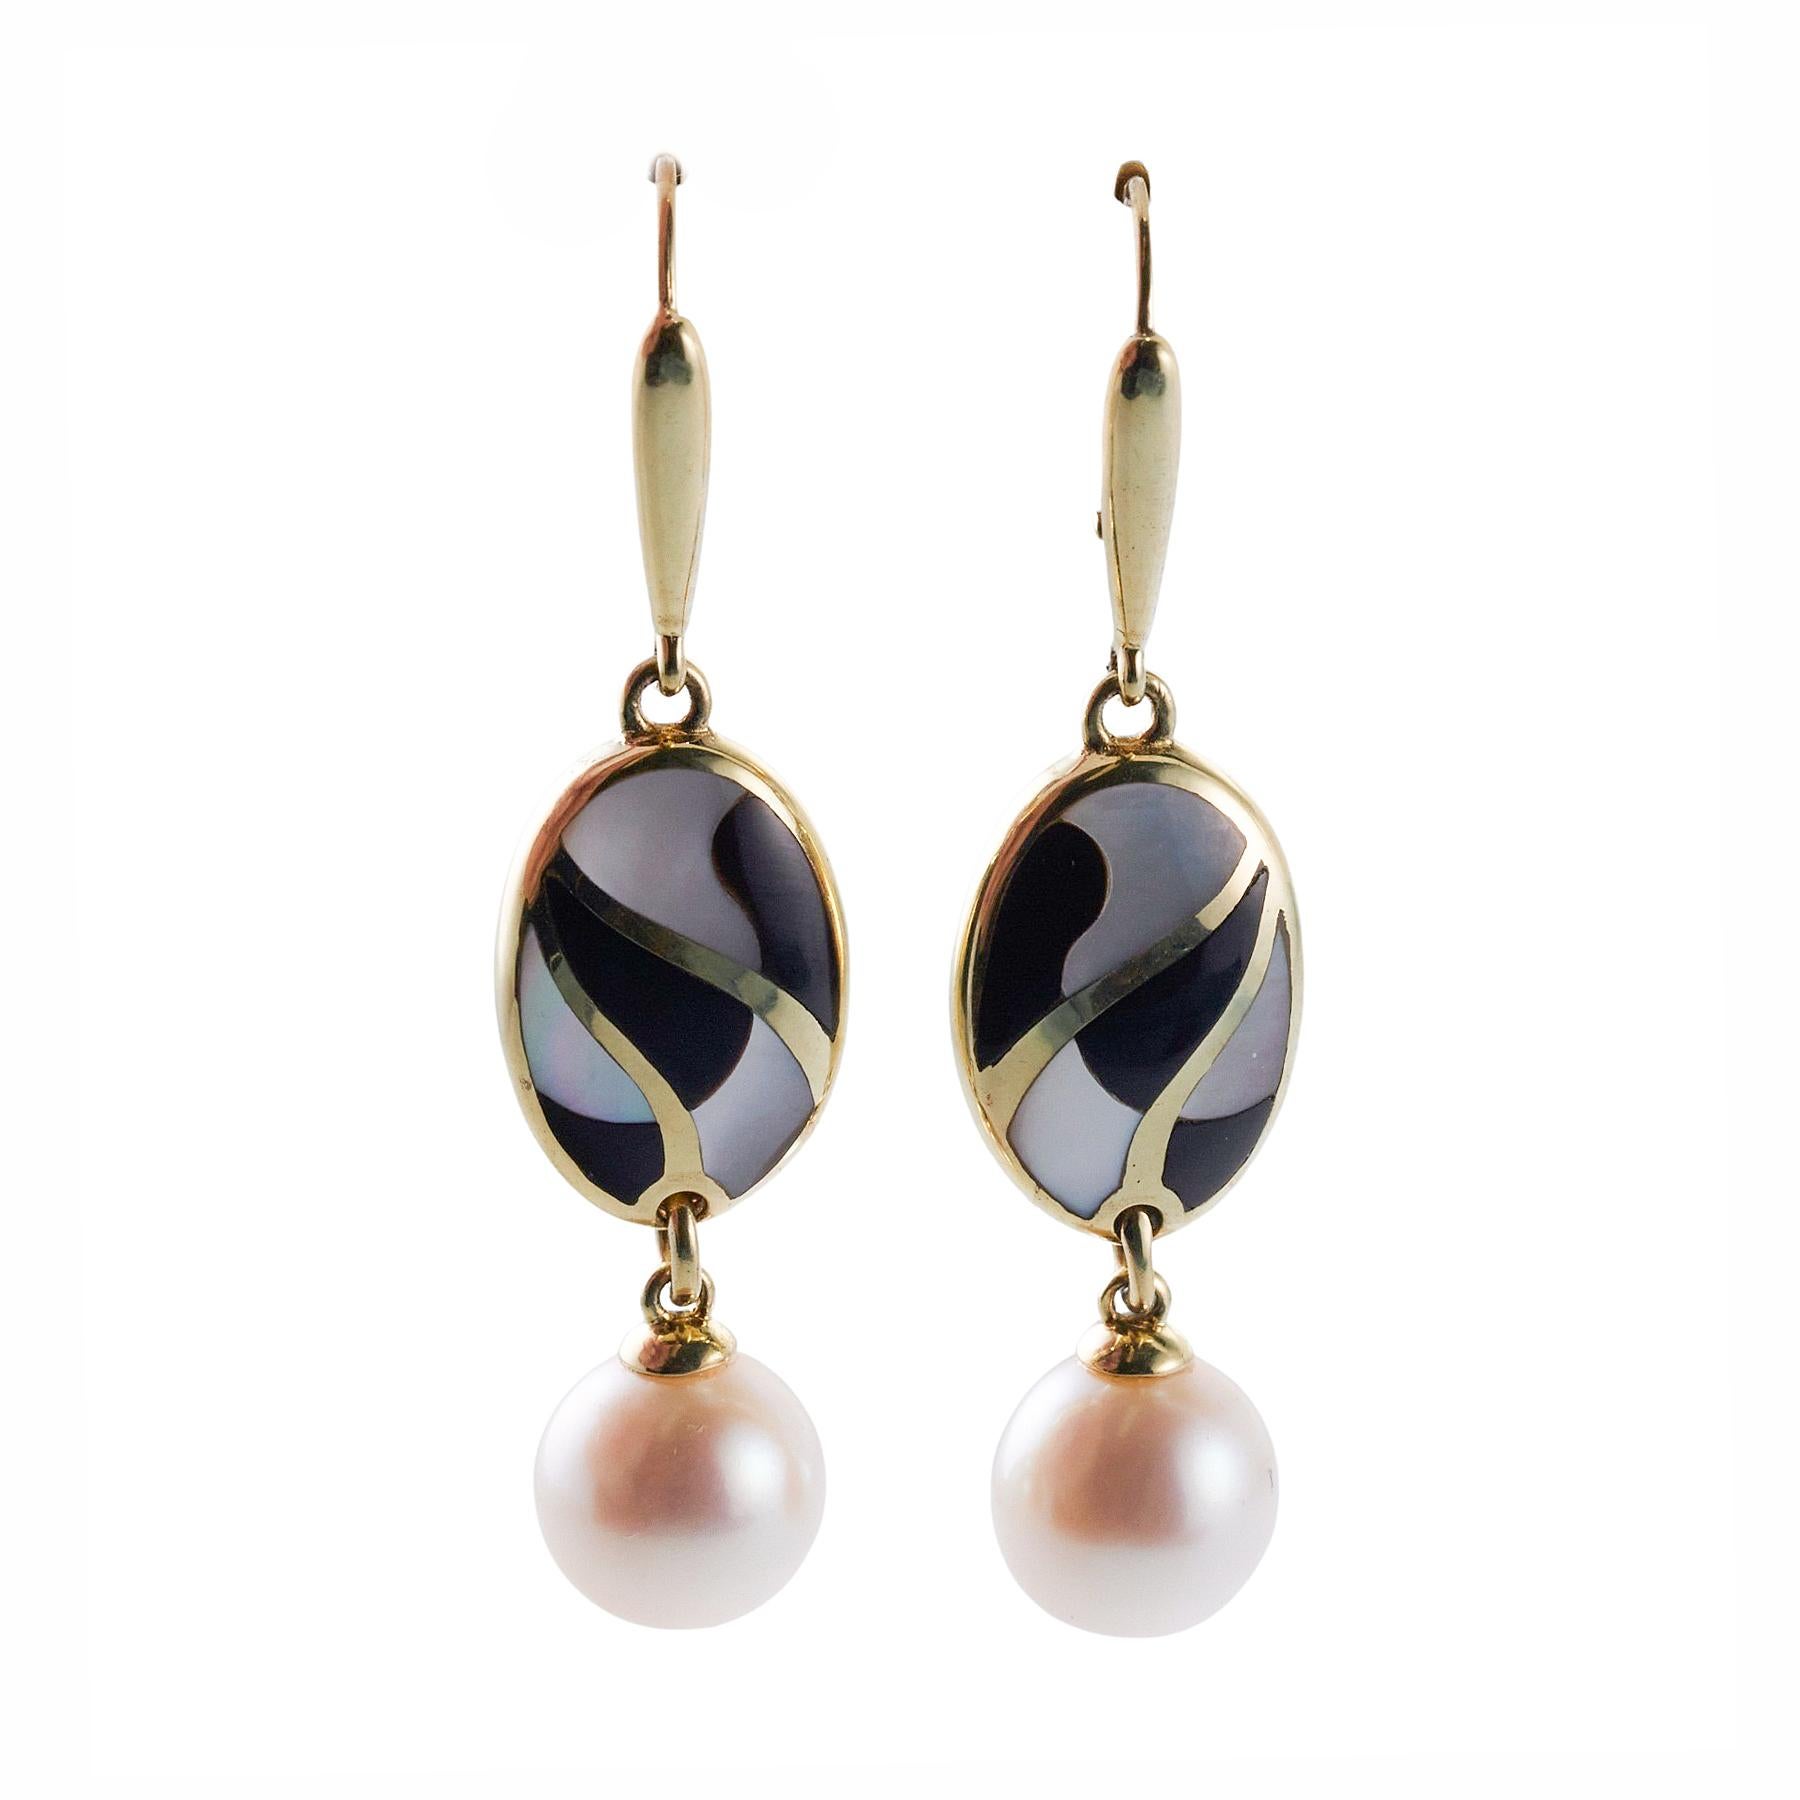 Pair of 14k gold Asch Grossbardt earrings, with 8.5mm pearls, inlay mother of pearl and onyx. Earrings are 45mm long. 6.5 grams.